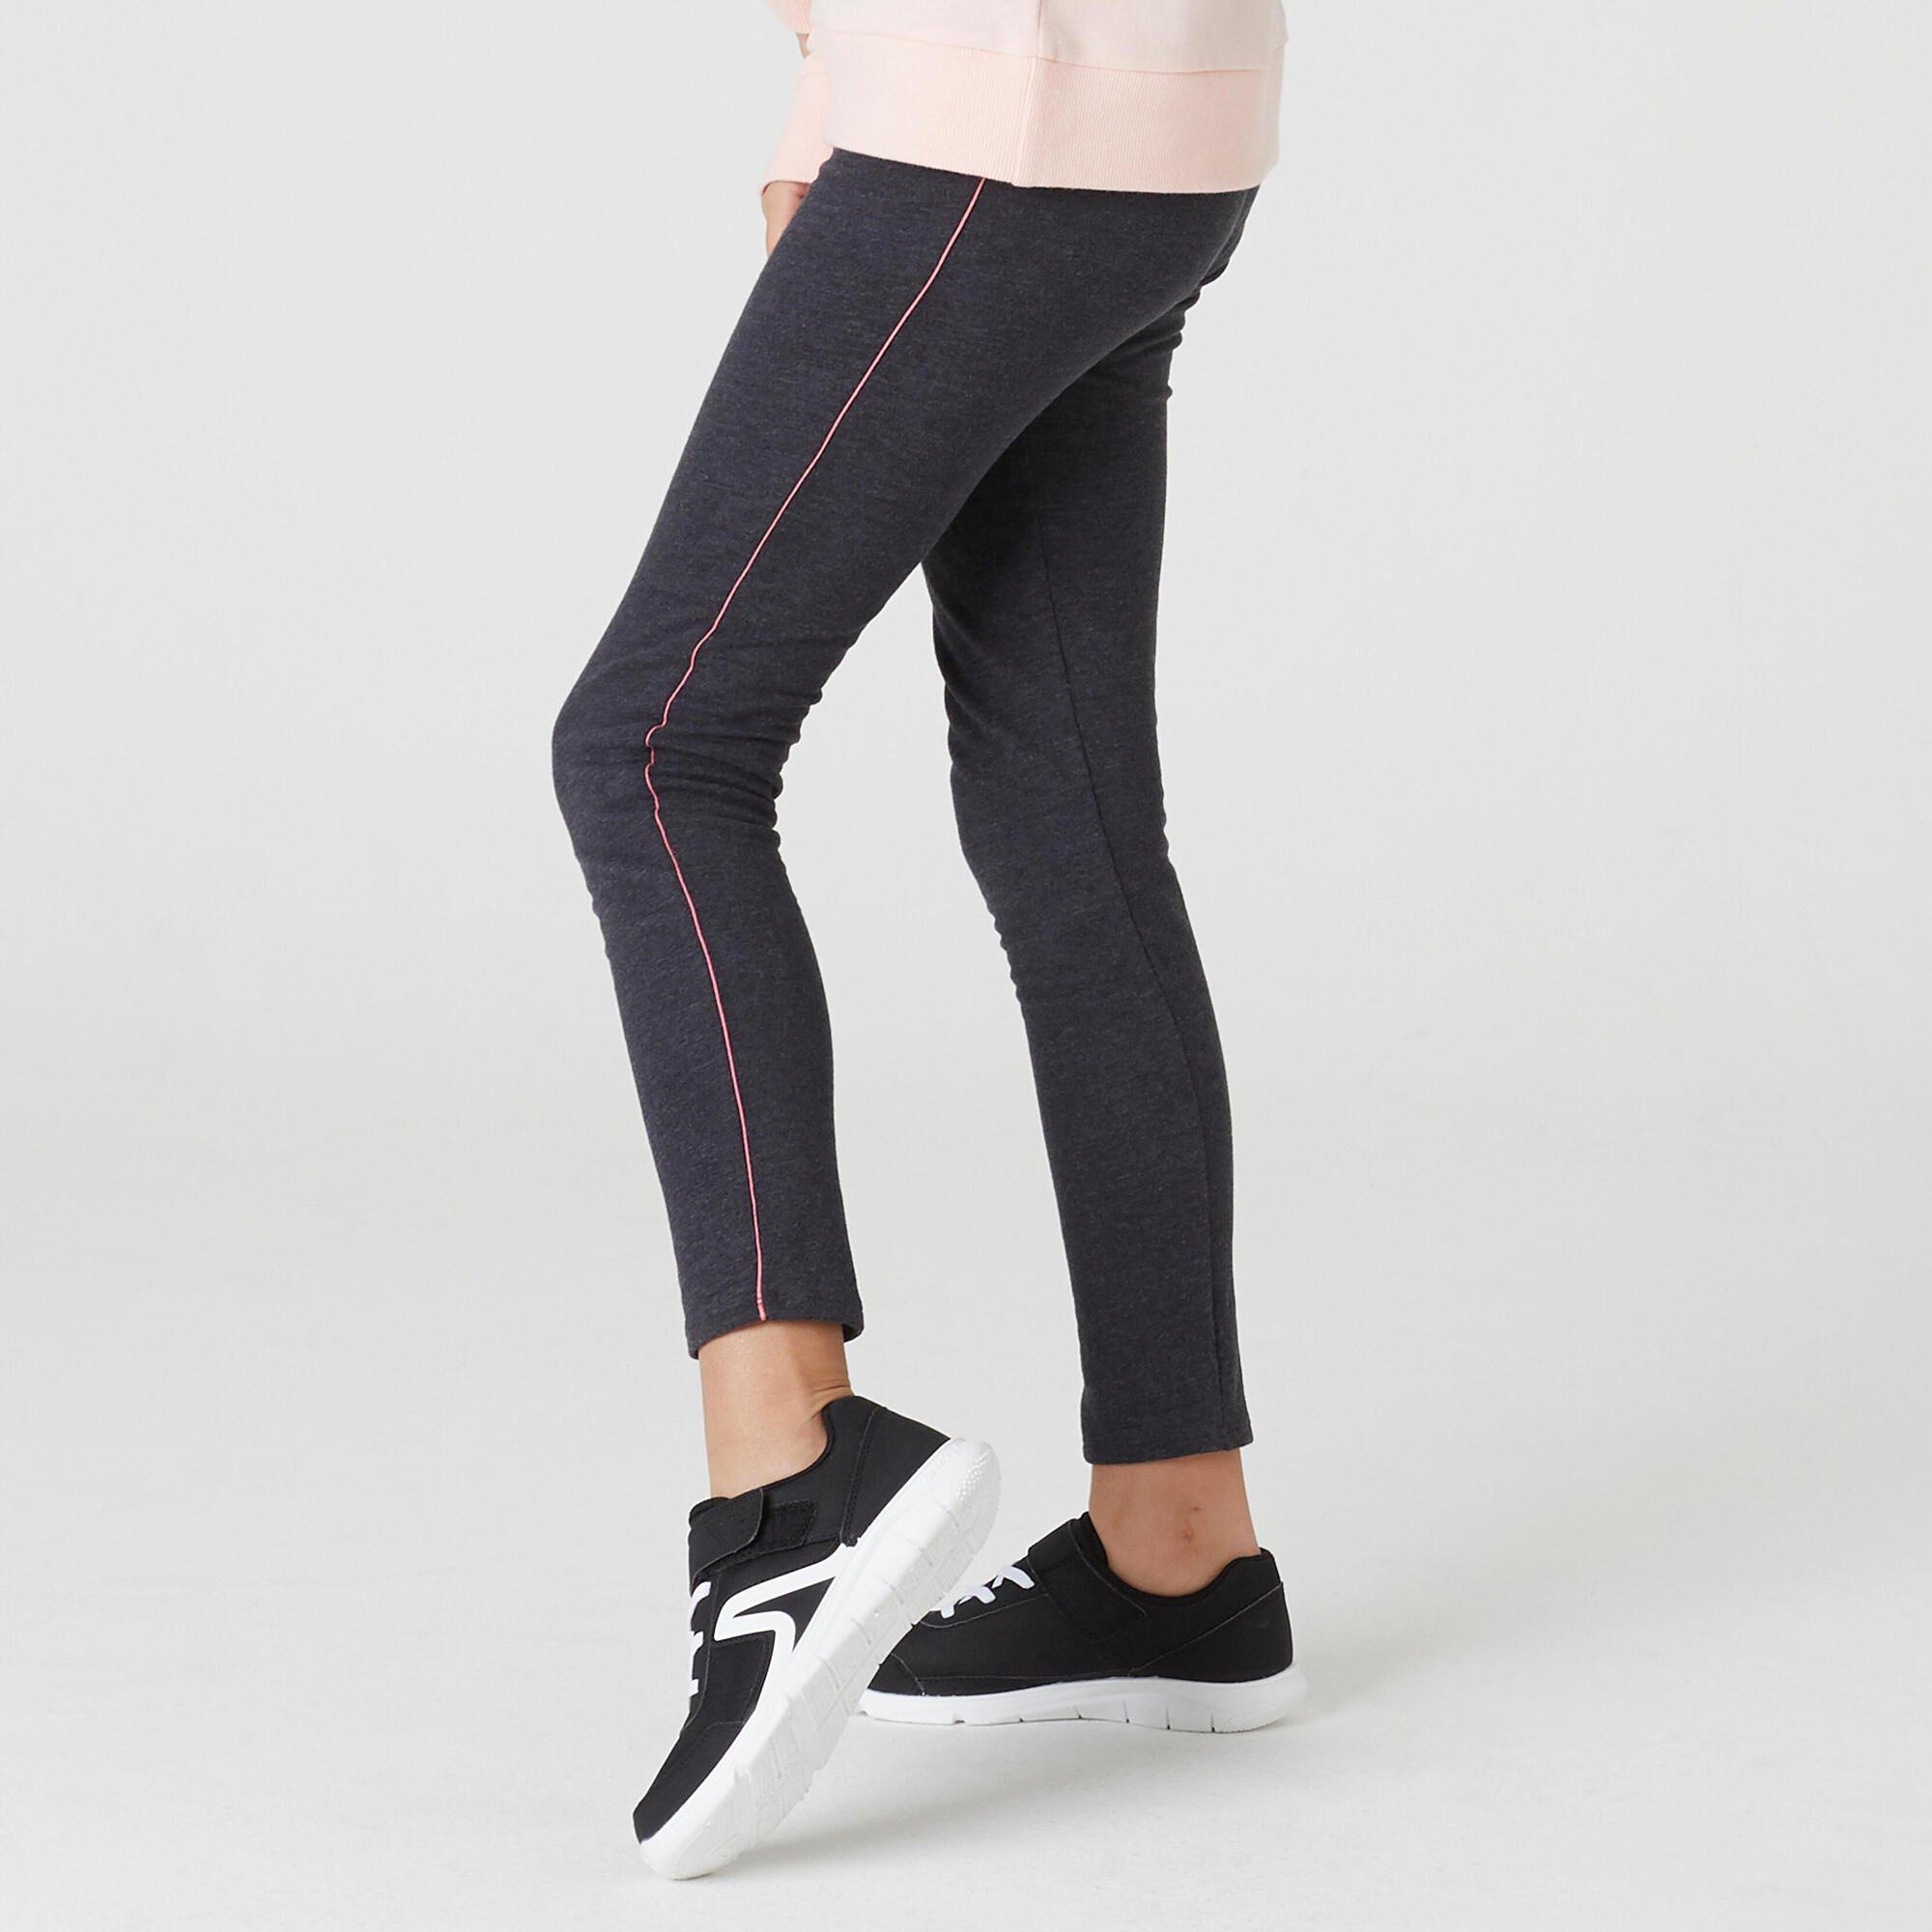 Decathlon Warm French Terry Cotton Leggings Basic product